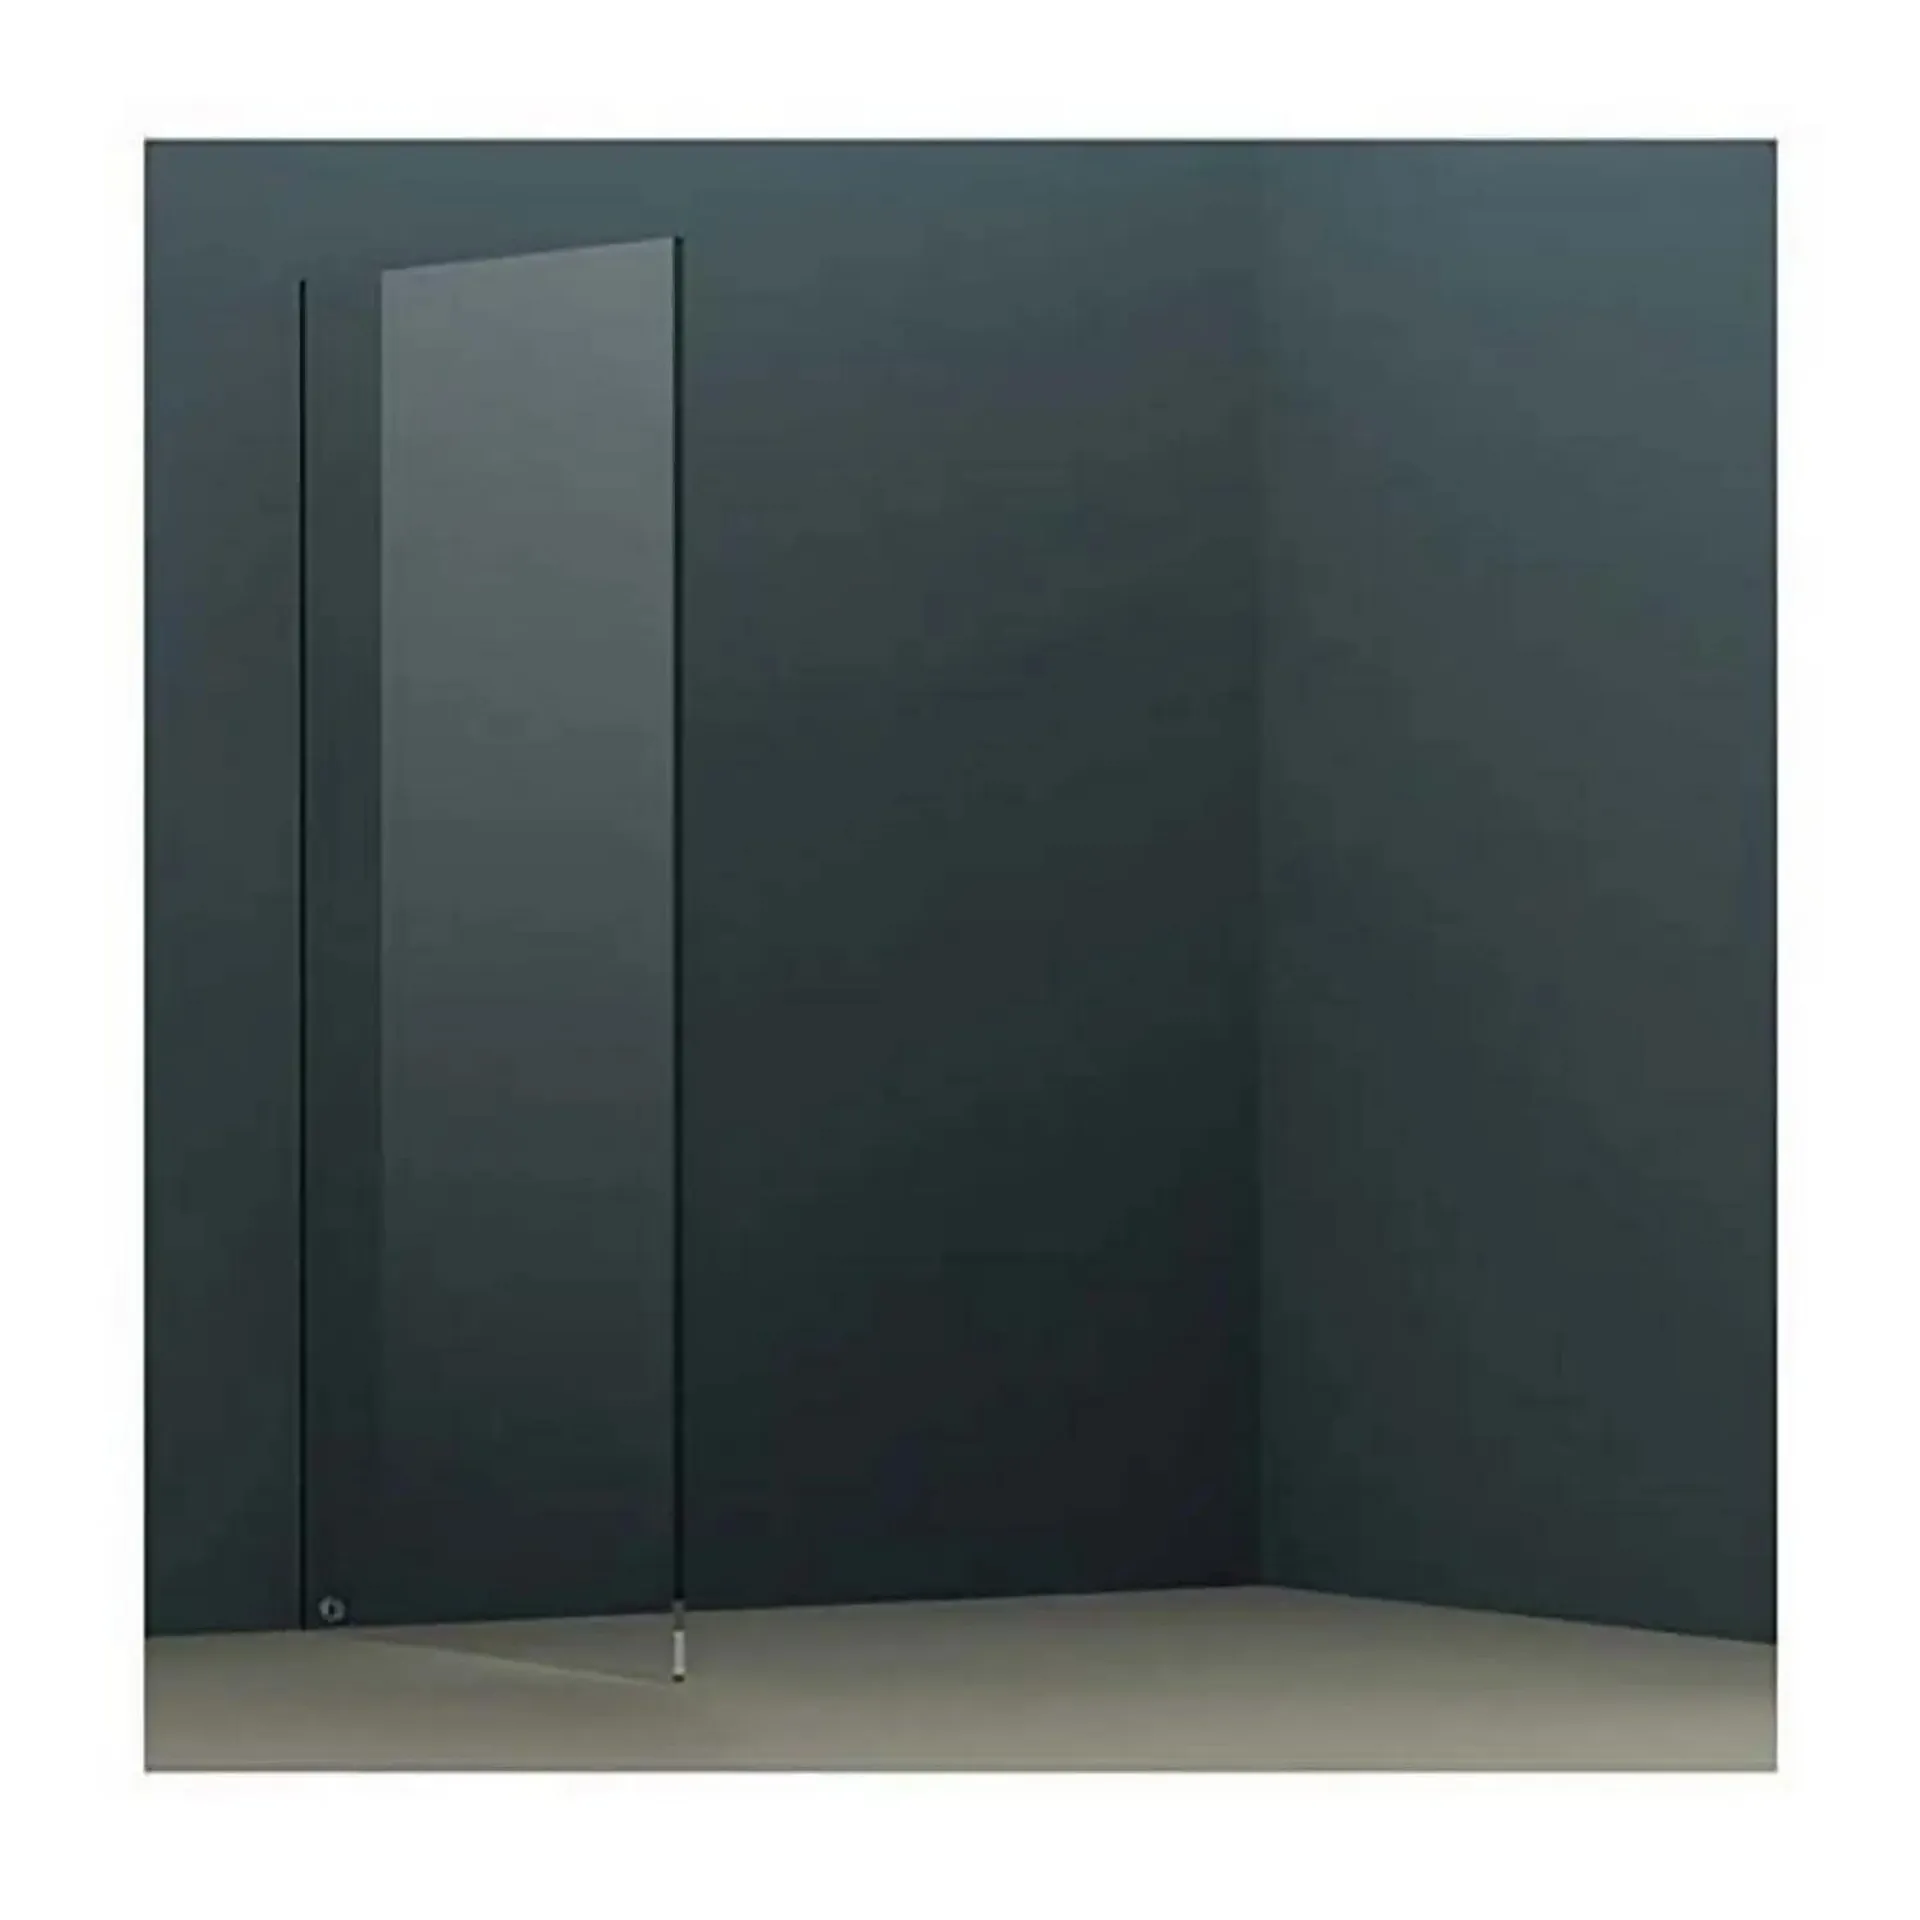 Wet Room Screen with Ceiling Bar 2000 x 900mm - Chrome